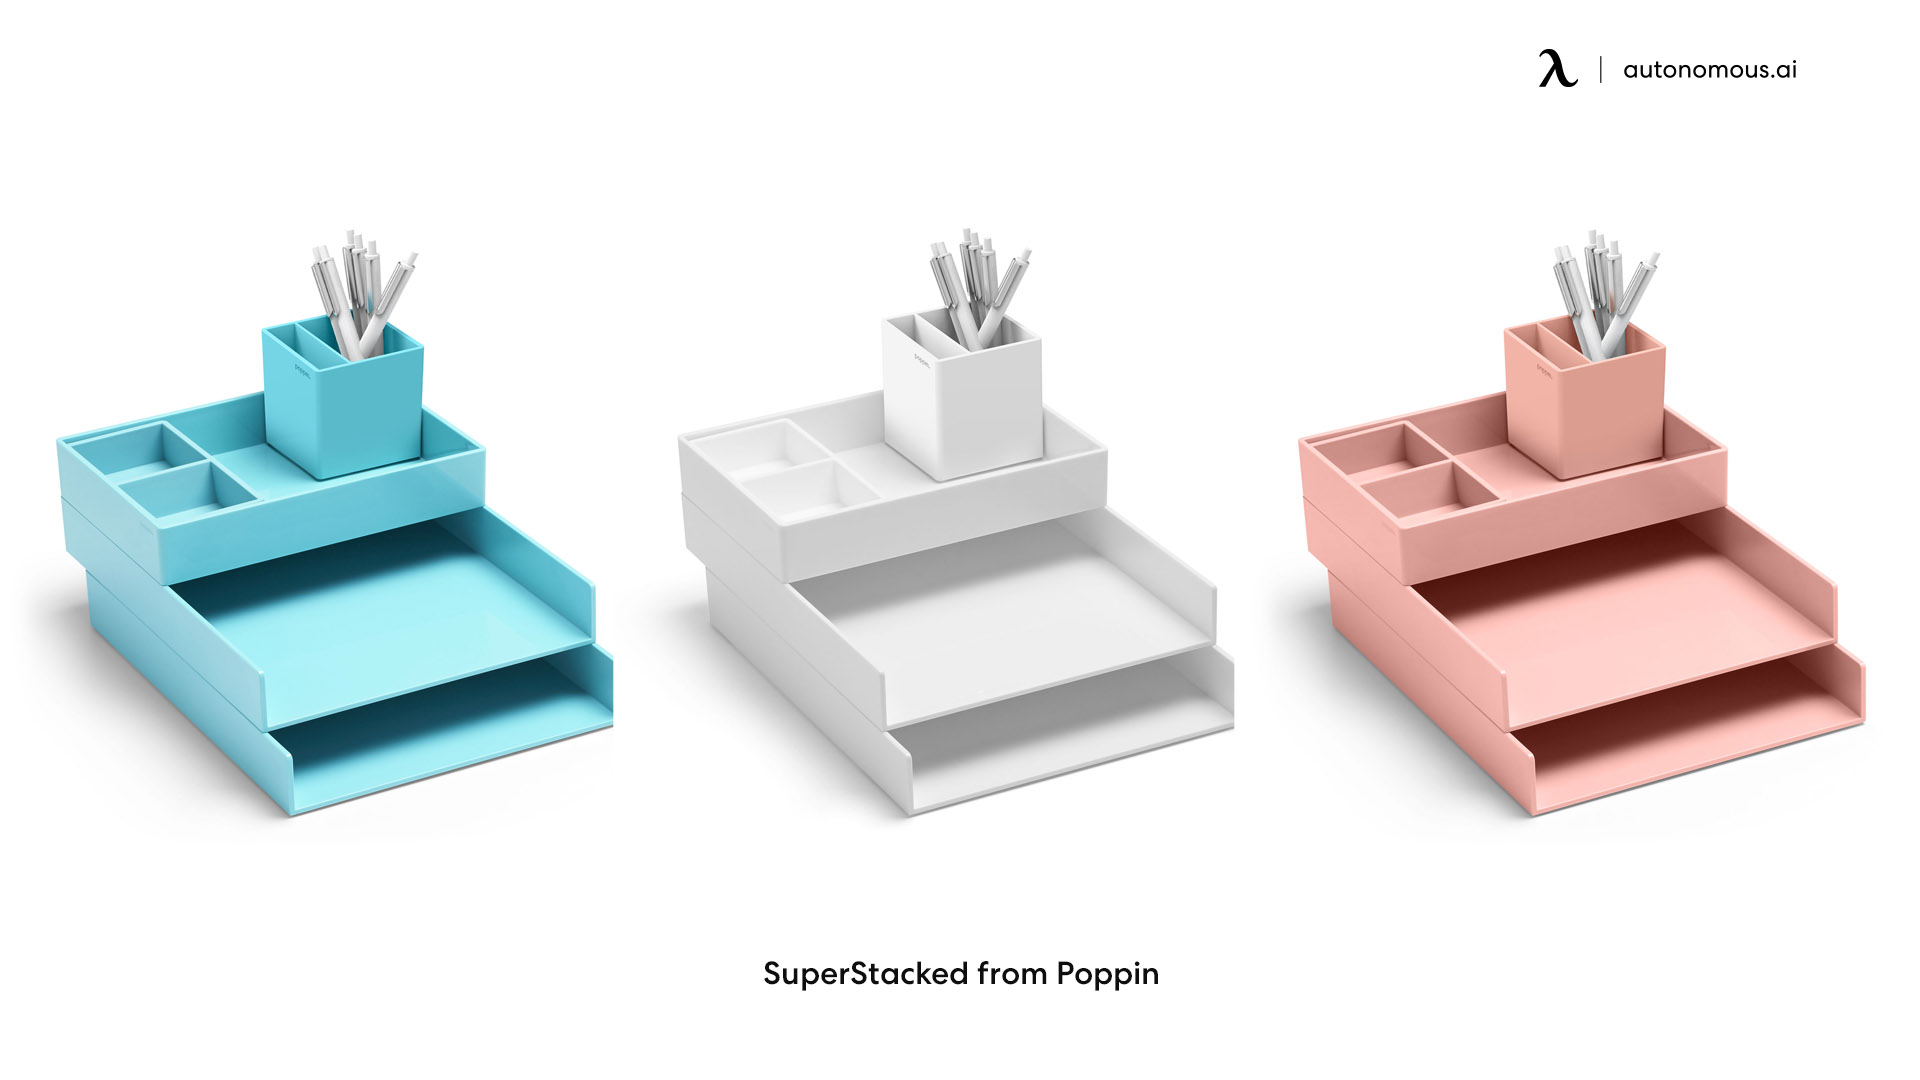 SuperStacked magnetic desk organizer from Poppin